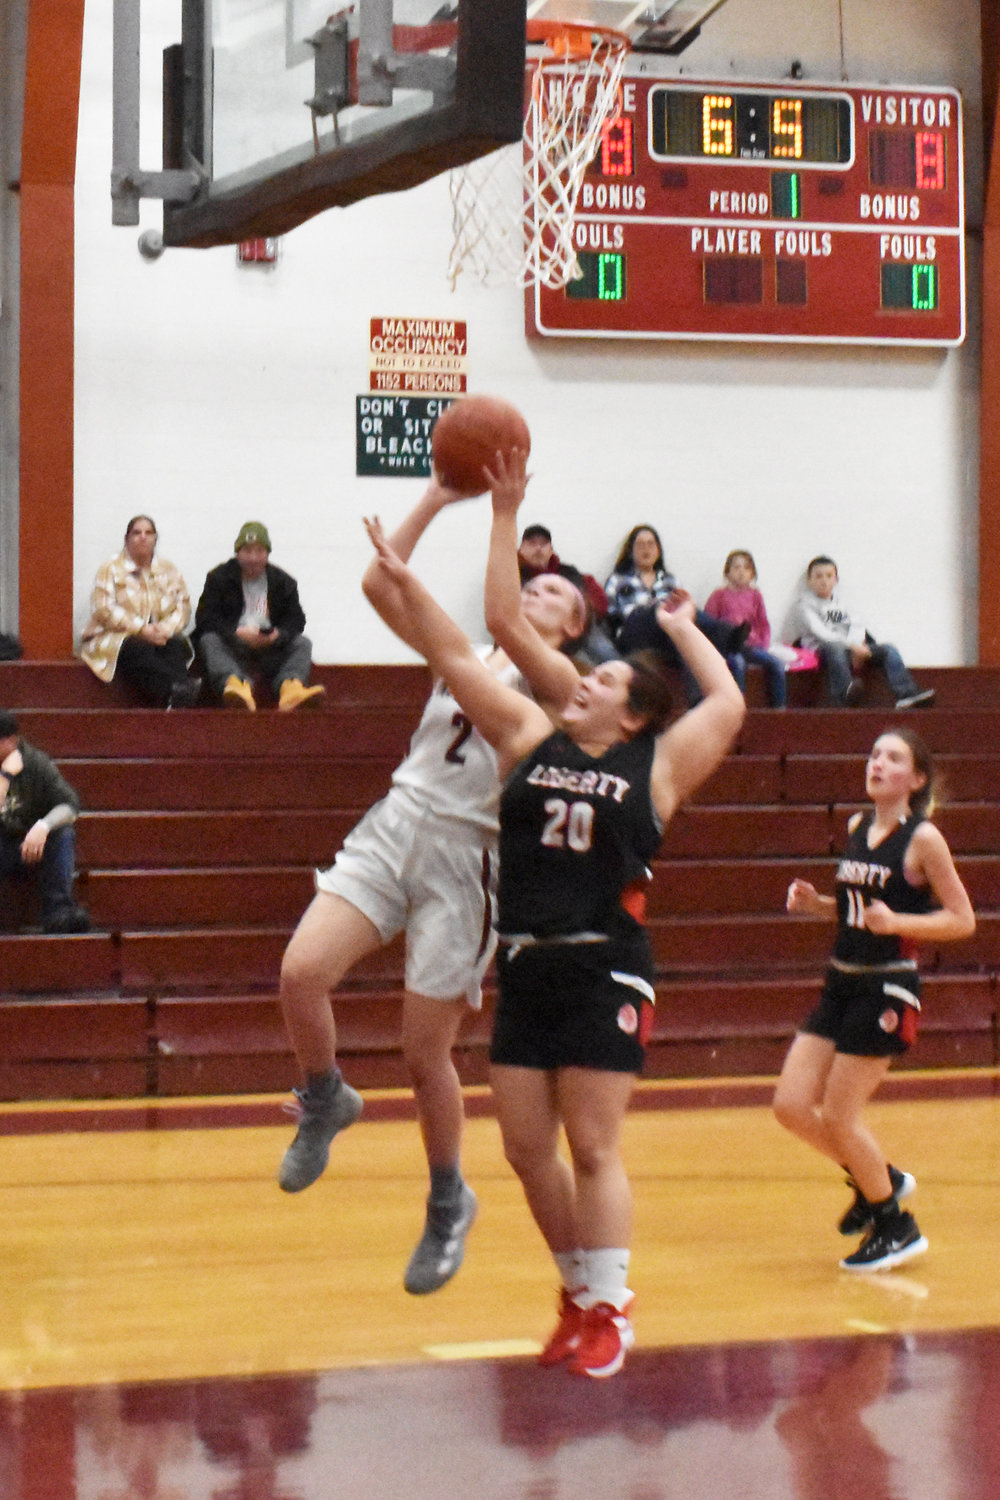 Mackenzie Carlson races down for a layup as time winds down in the first quarter. The shot gave Livingston Manor a 2-point lead.